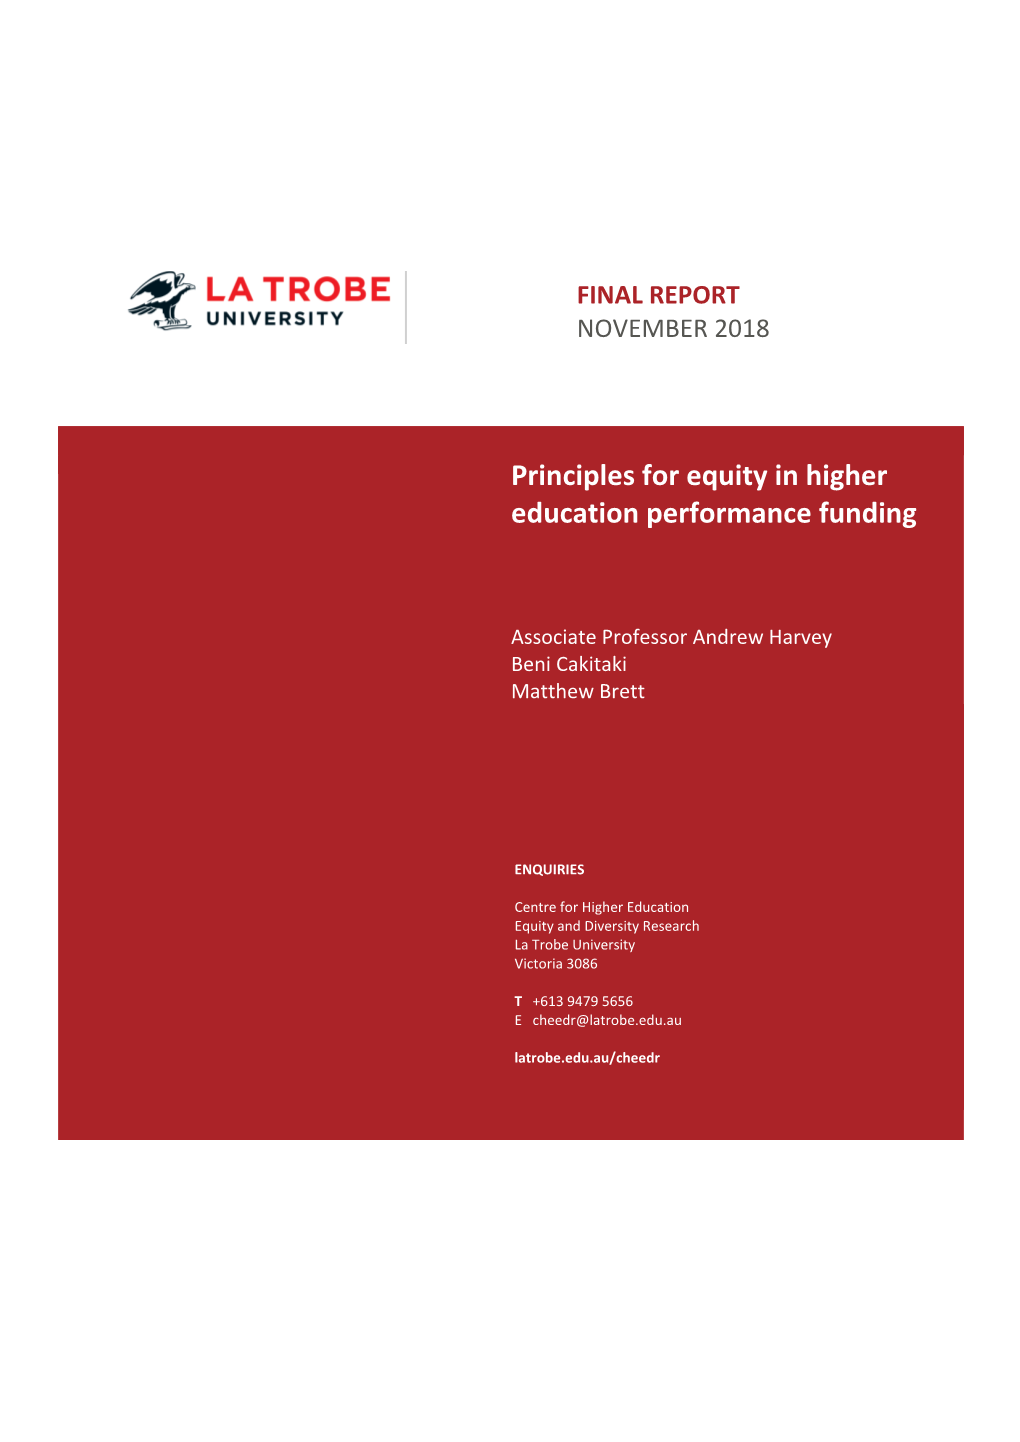 Principles for Equity in Higher Education Performance Funding